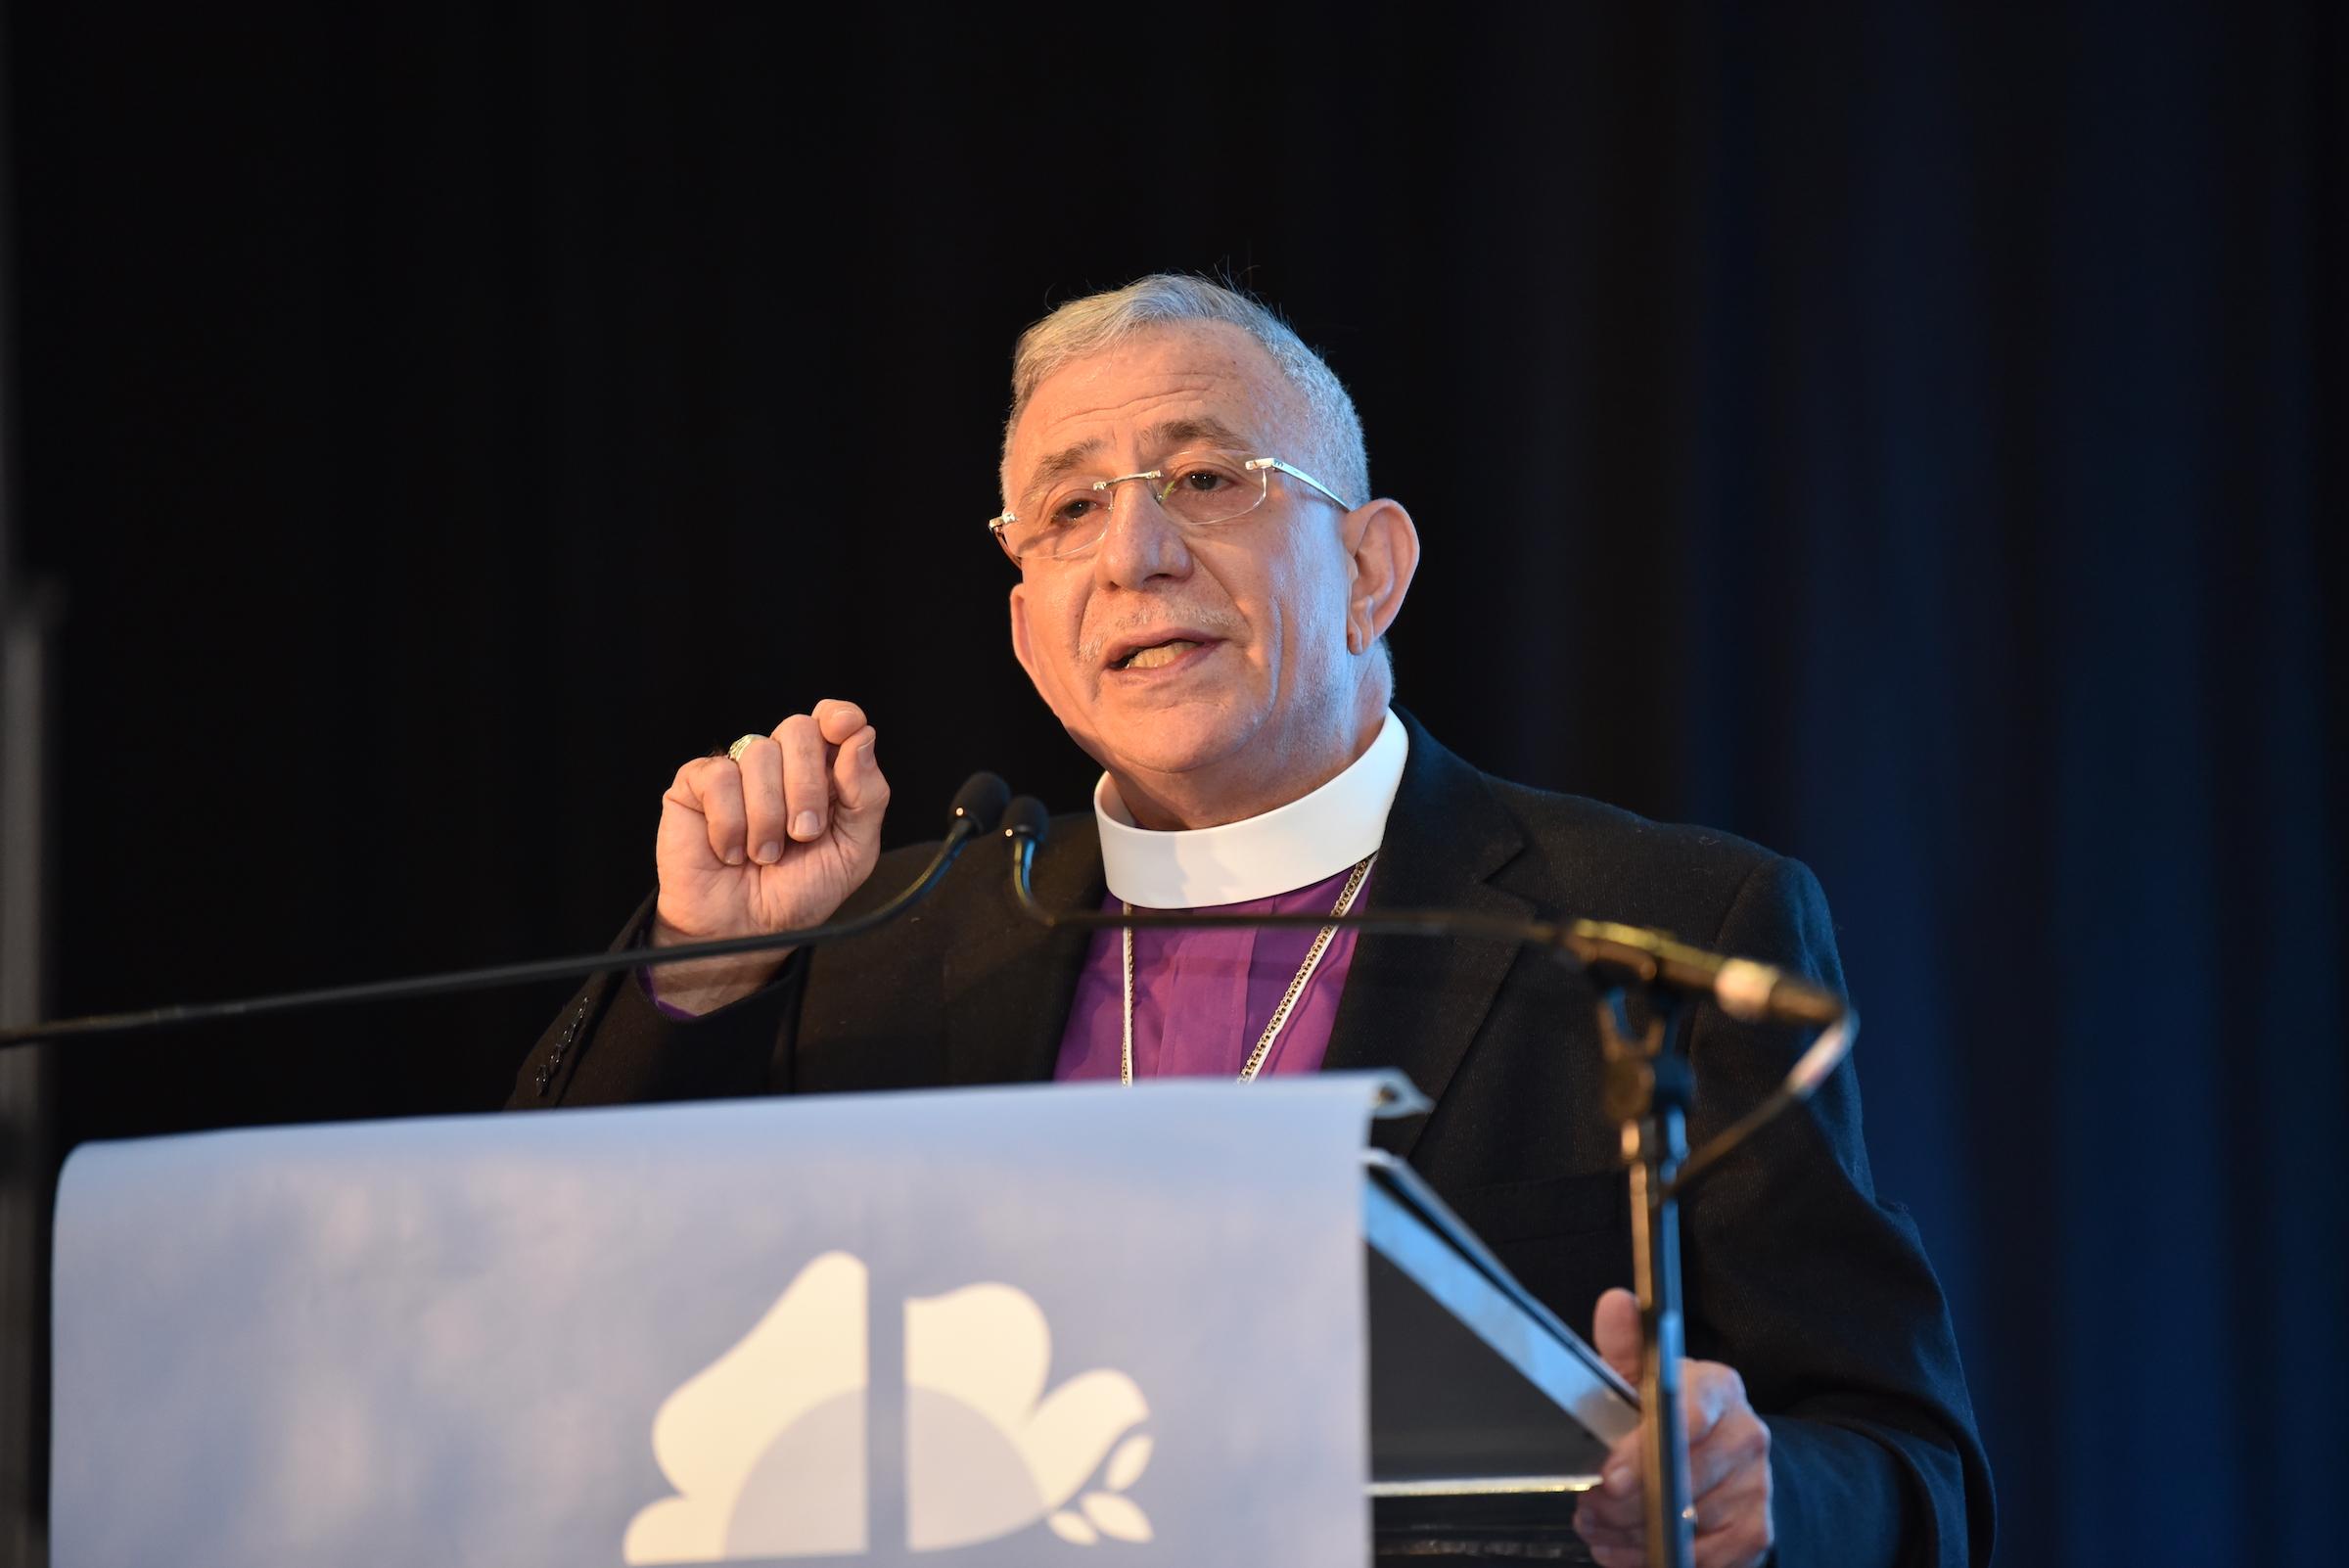 The Lutheran World Federation (LWF) President Bishop Dr Munib A. Younan addressing participants on the opening day of the Twelfth Assembly of the LWF in Namibiaâs capital Windhoek. Photo: LWF/Albin Hillert